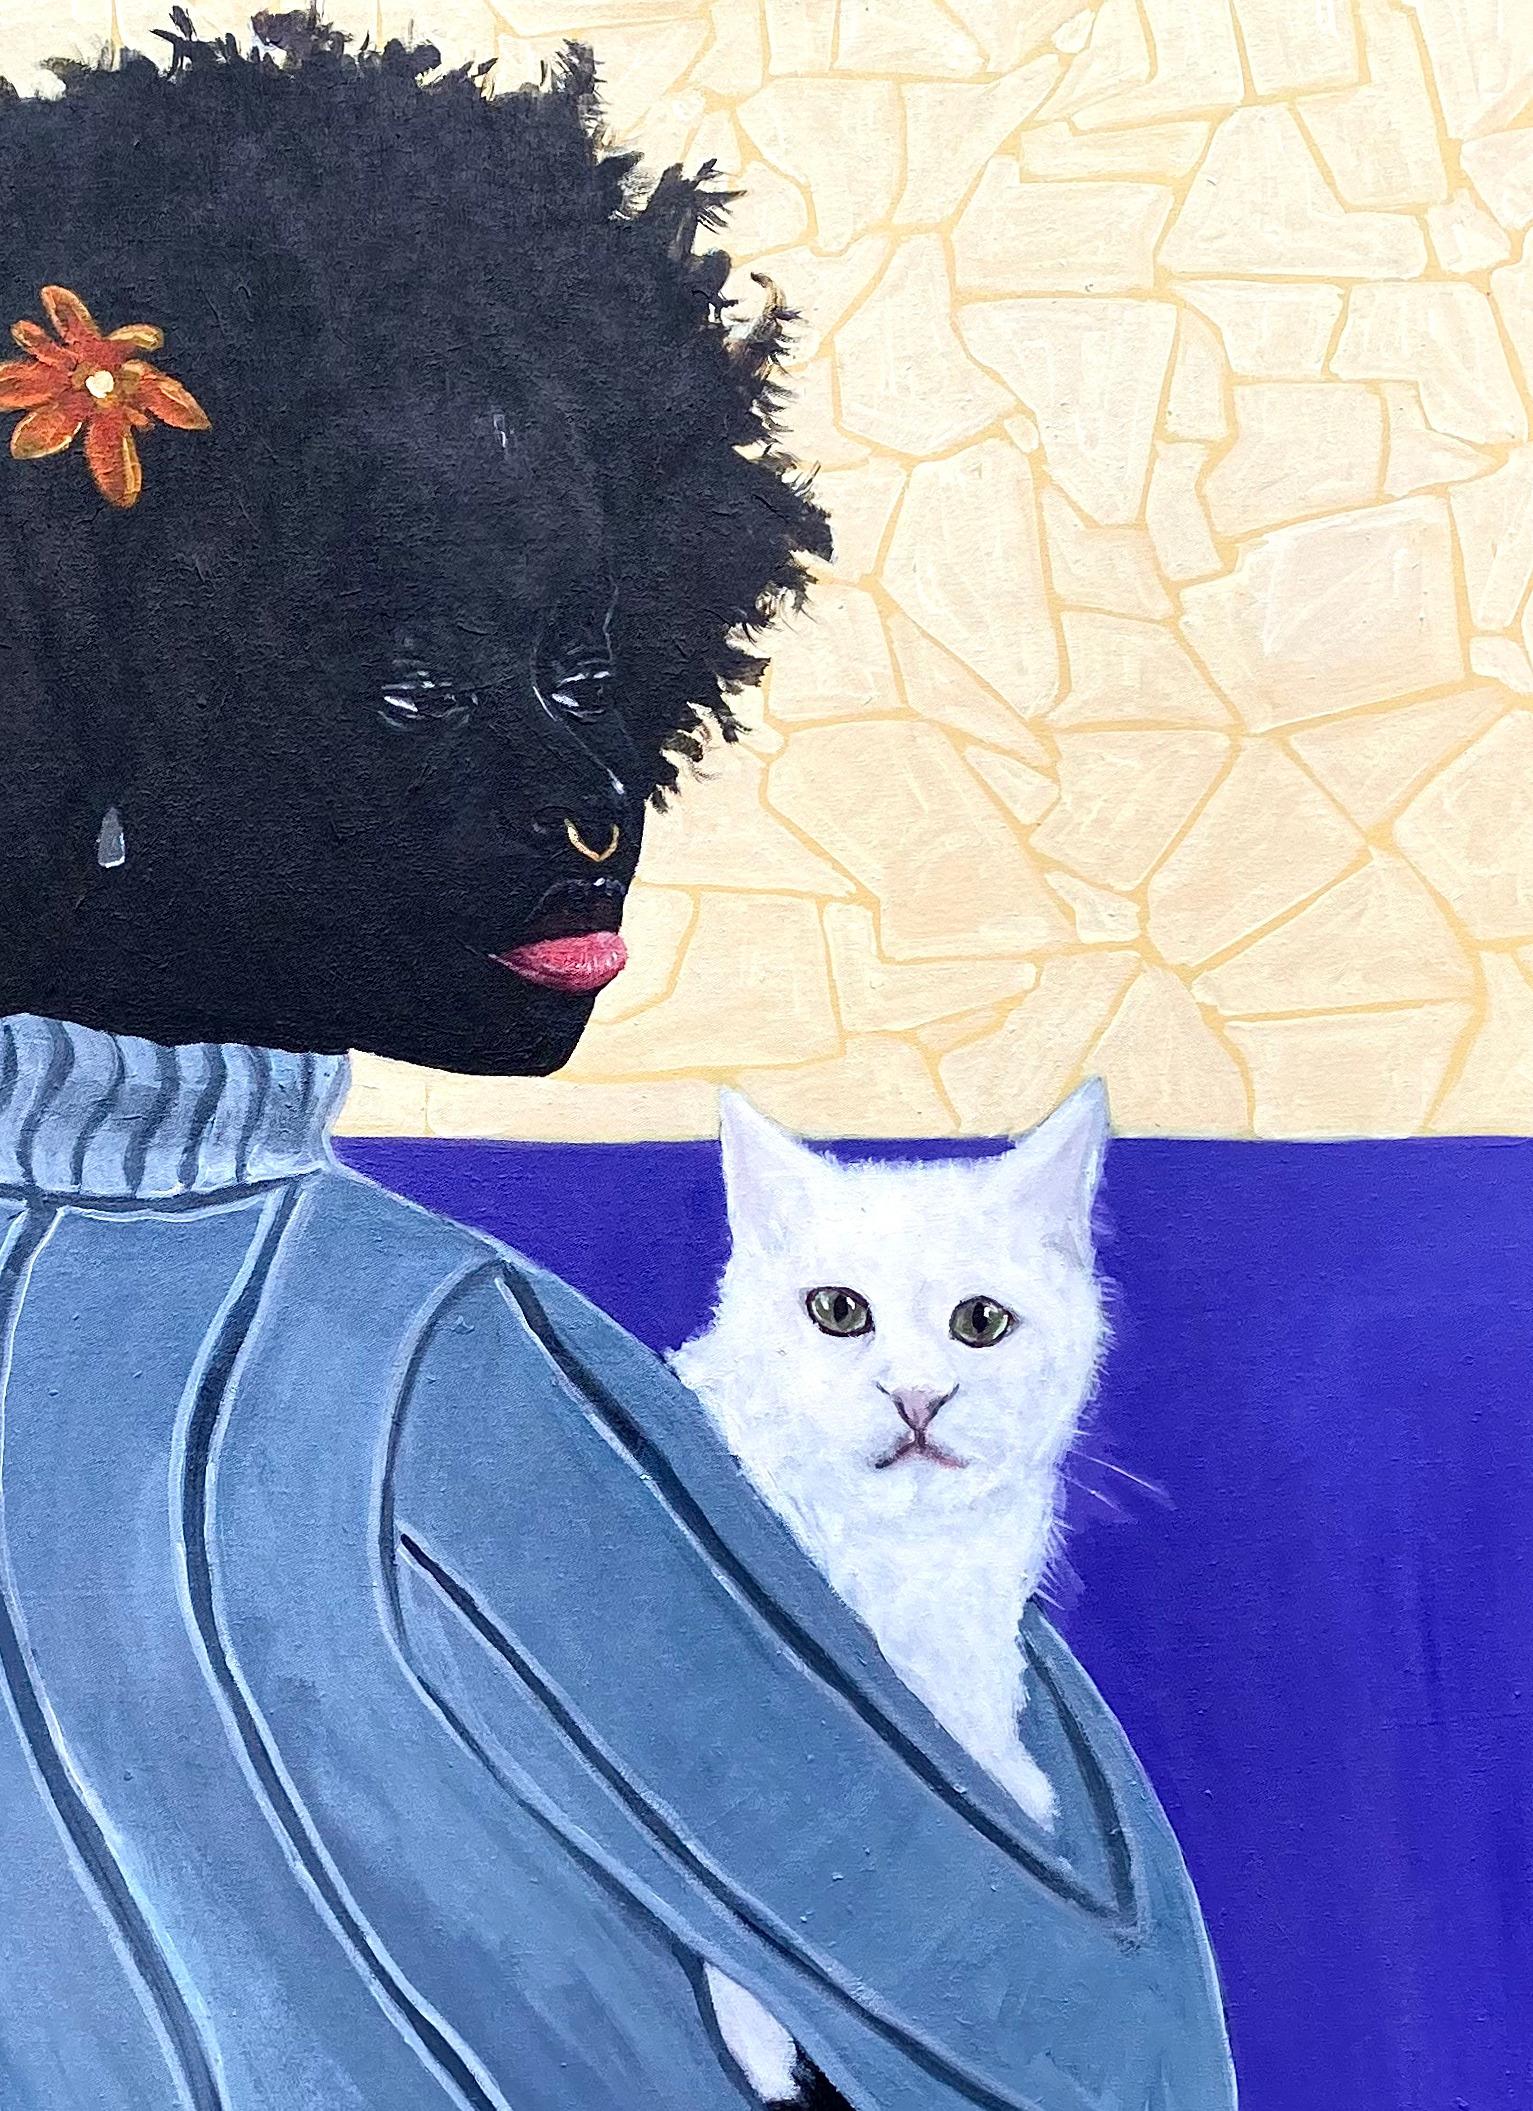 My Little Pet and I - Expressionist Painting by Akingbade Mayowa